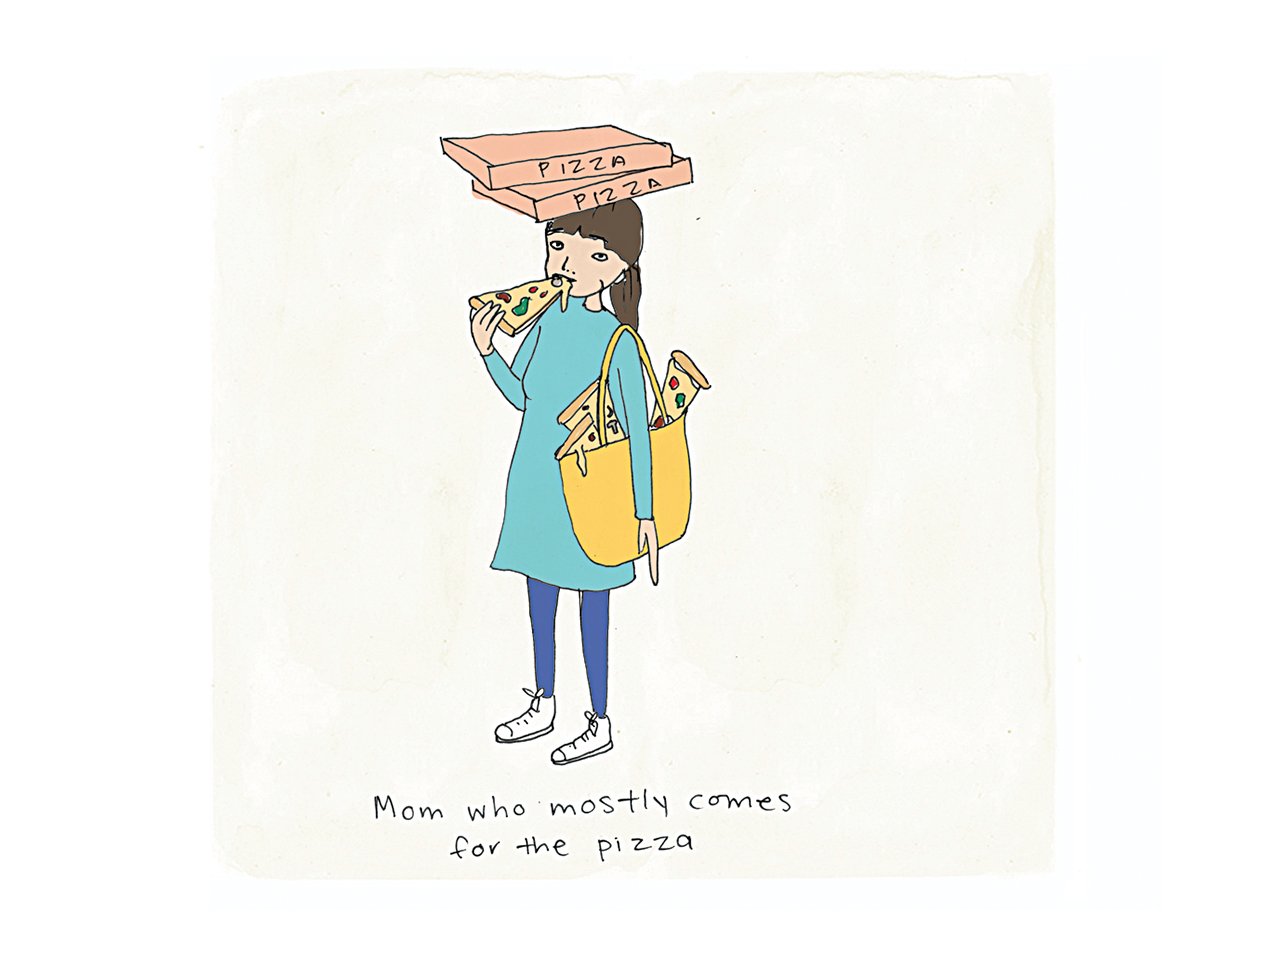 Illustration of the mom who mostly comes for the pizza who has pizza slices hanging out of her purse and pizza boxes balanced on her head